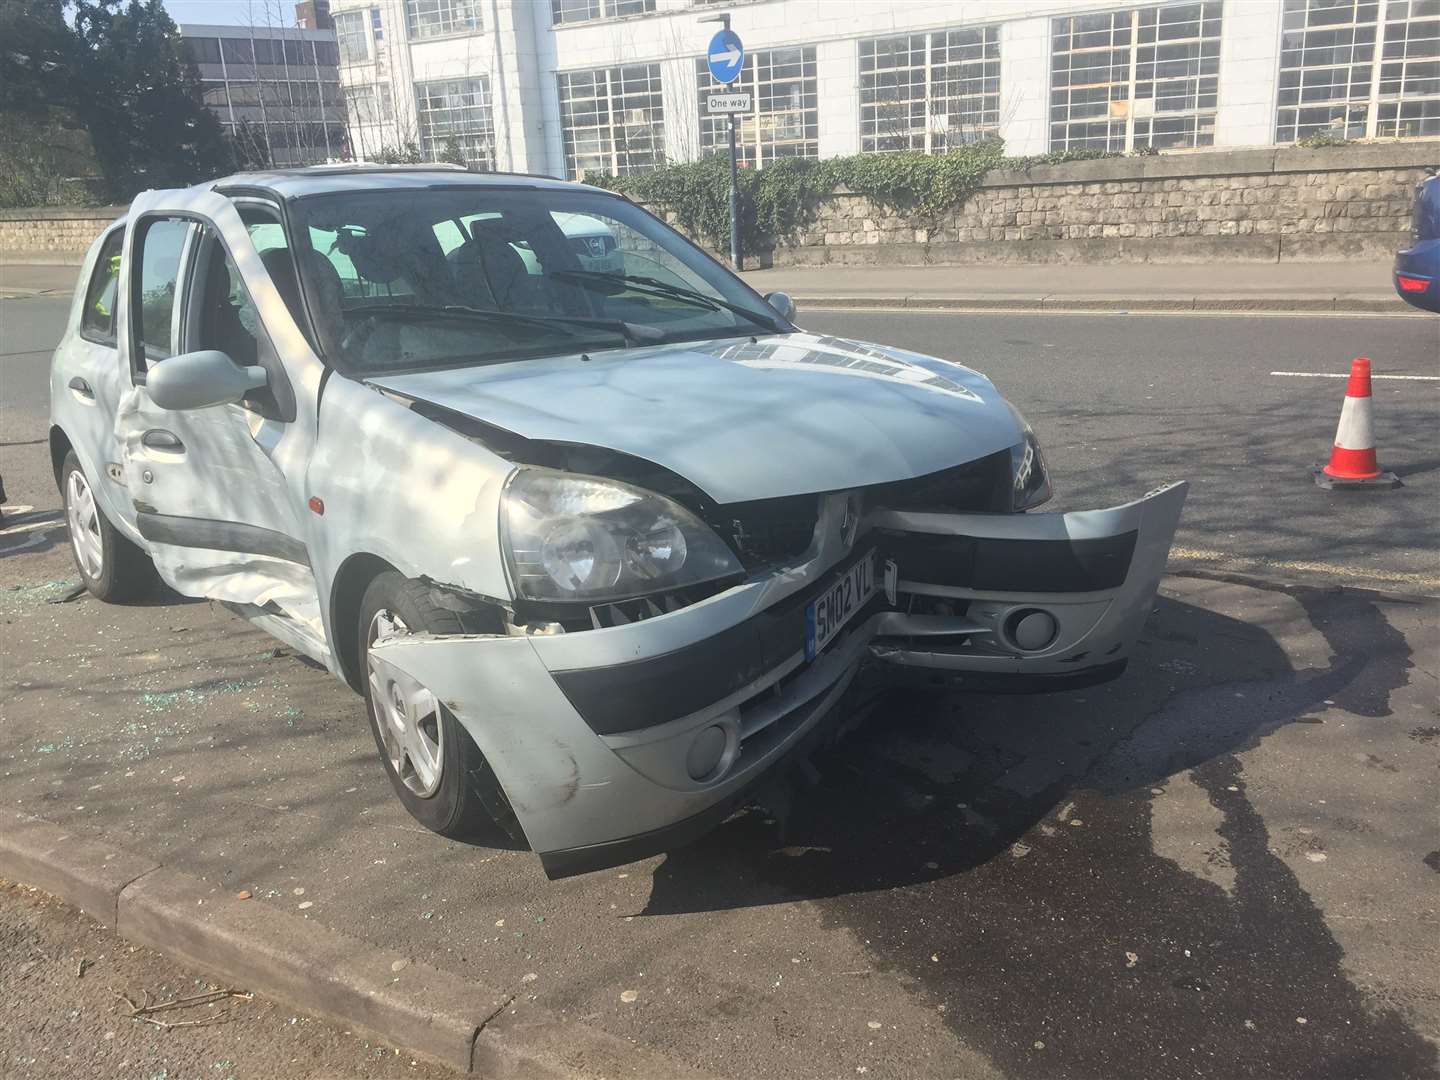 The car smashed into a wall outside Maidstone police station